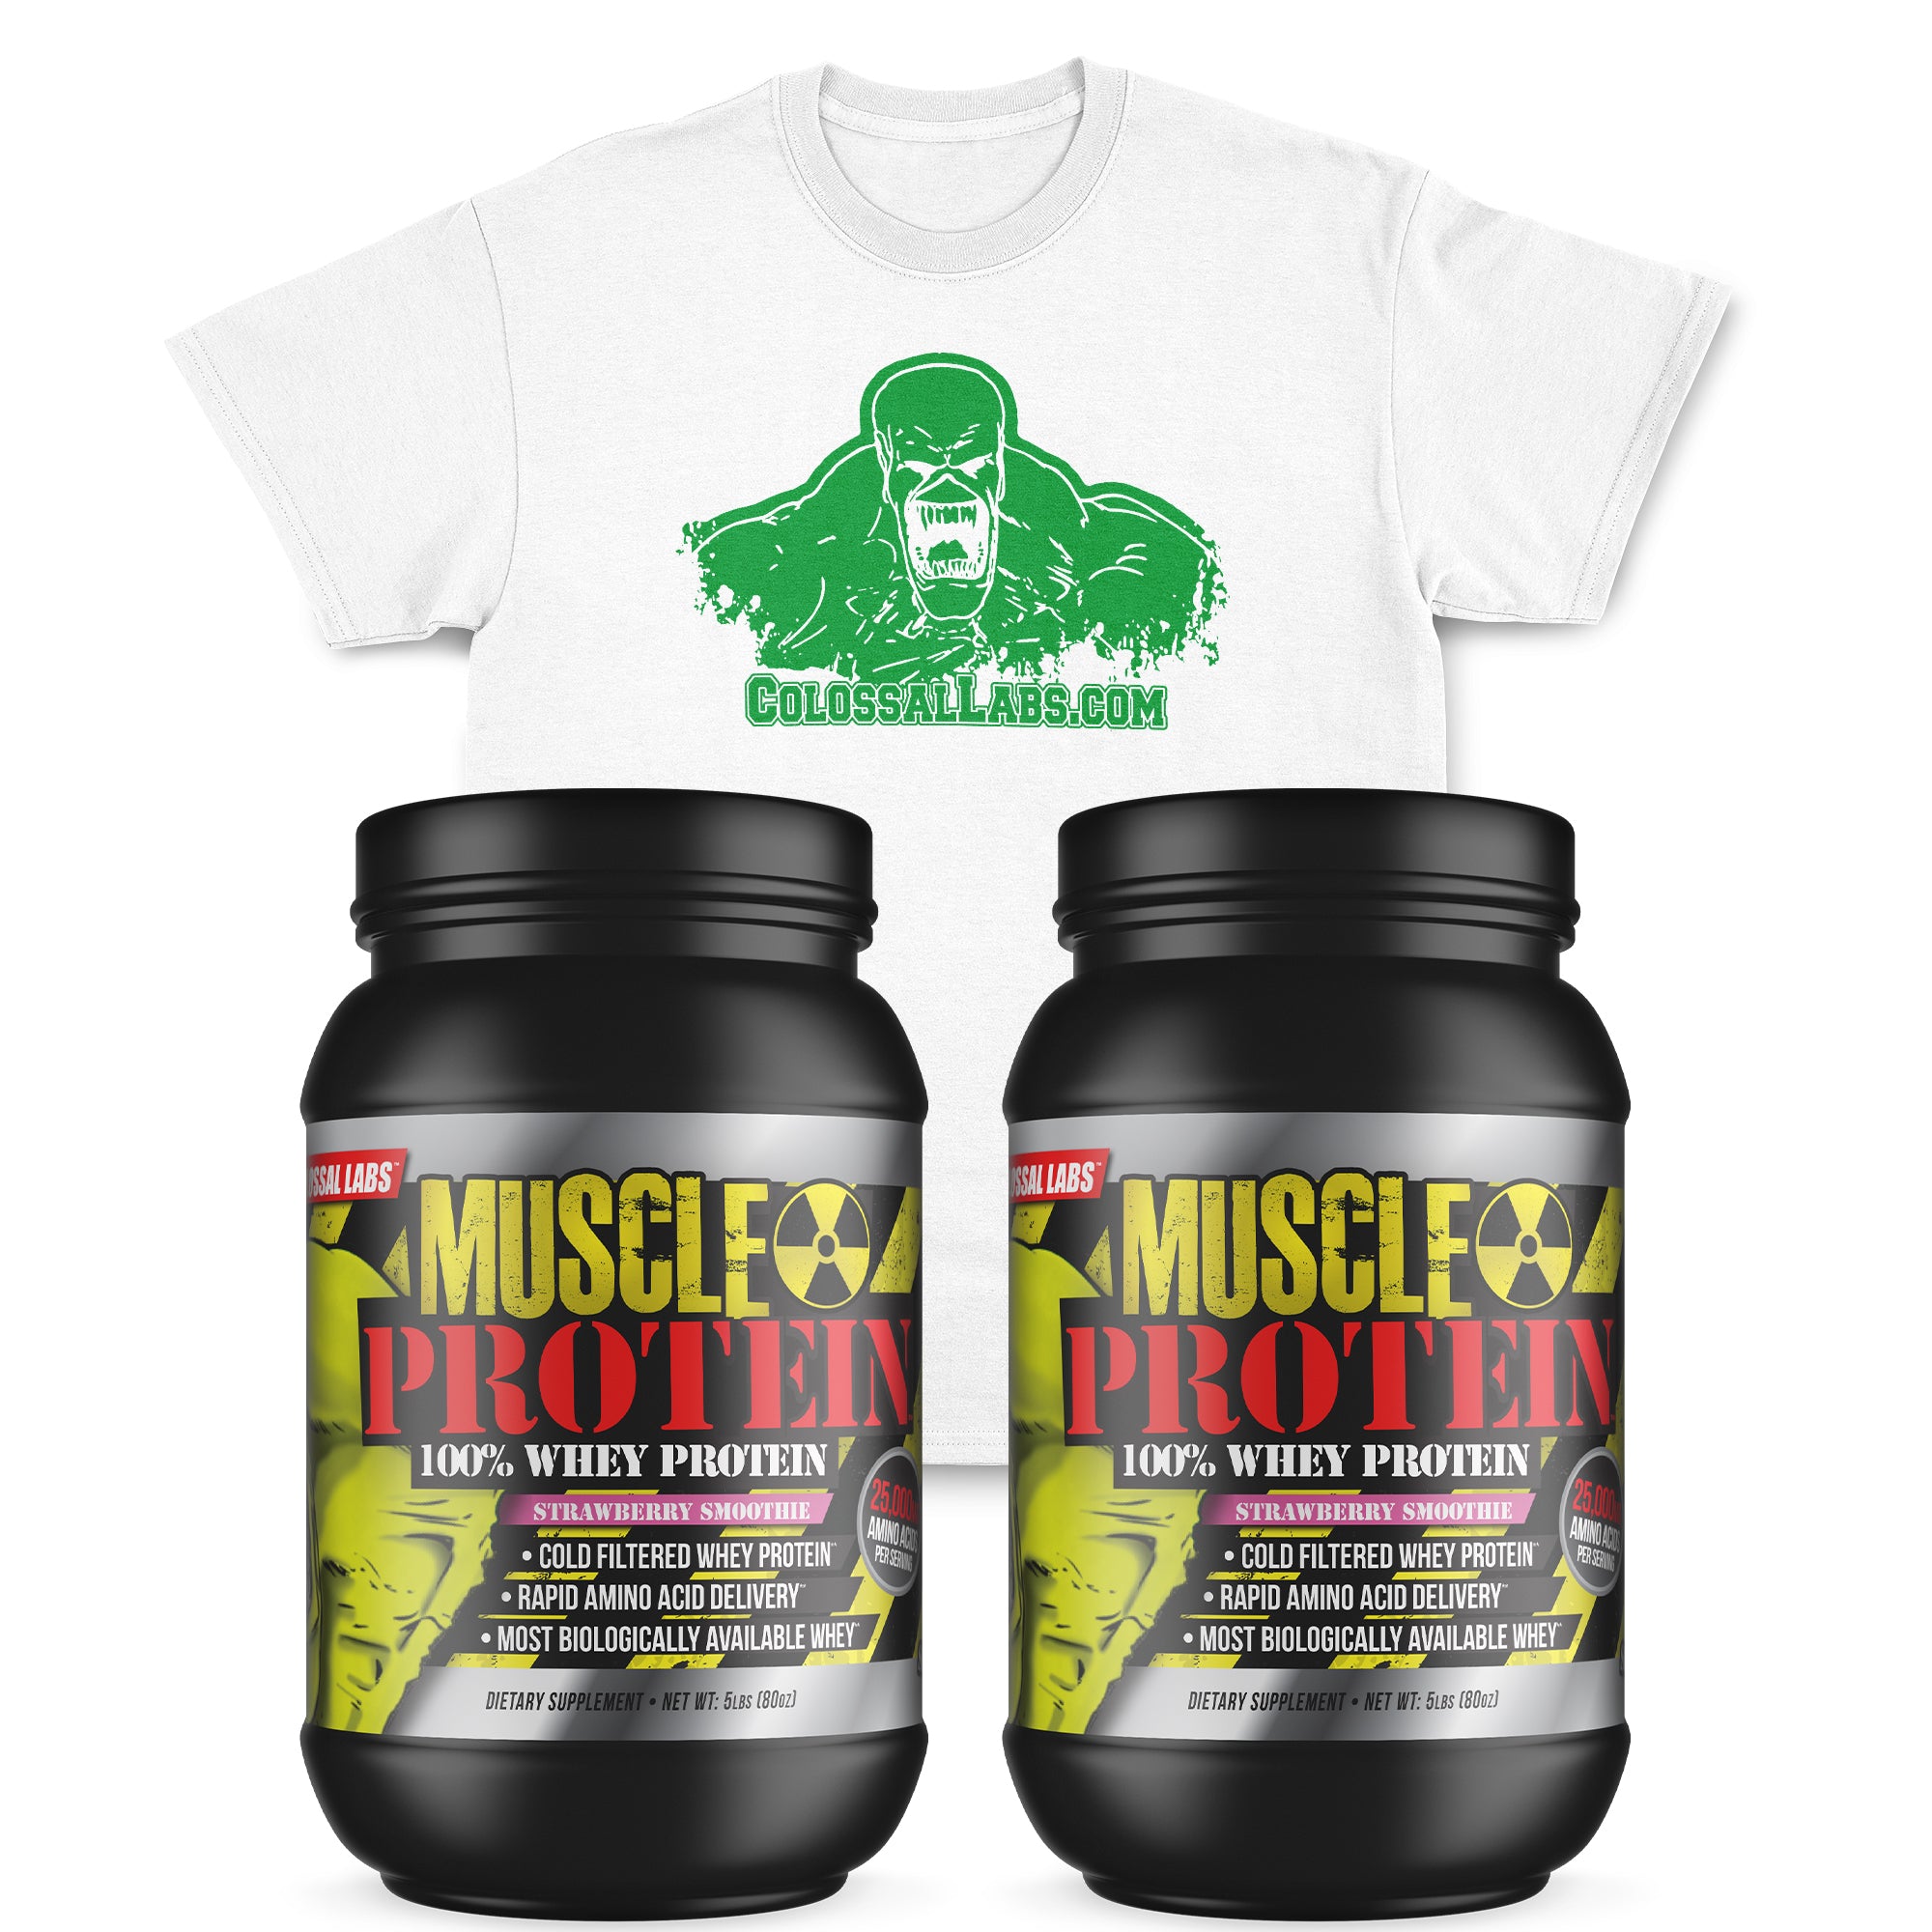 2 x 5 lbs Muscle Protein & T-Shirt Combo